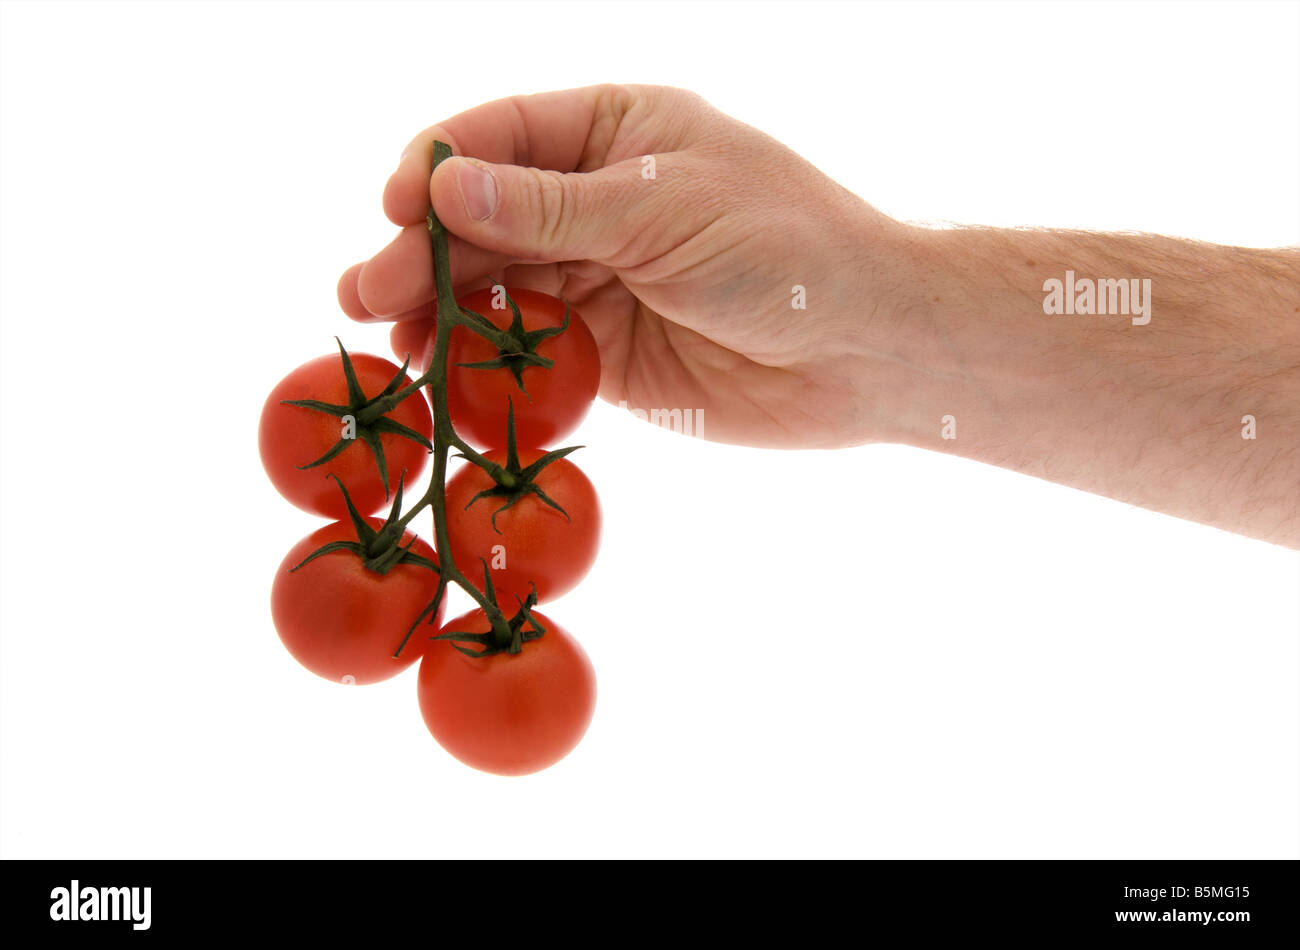 mans male right outstretched hand holding vine grown tomatoes against a white background Stock Photo